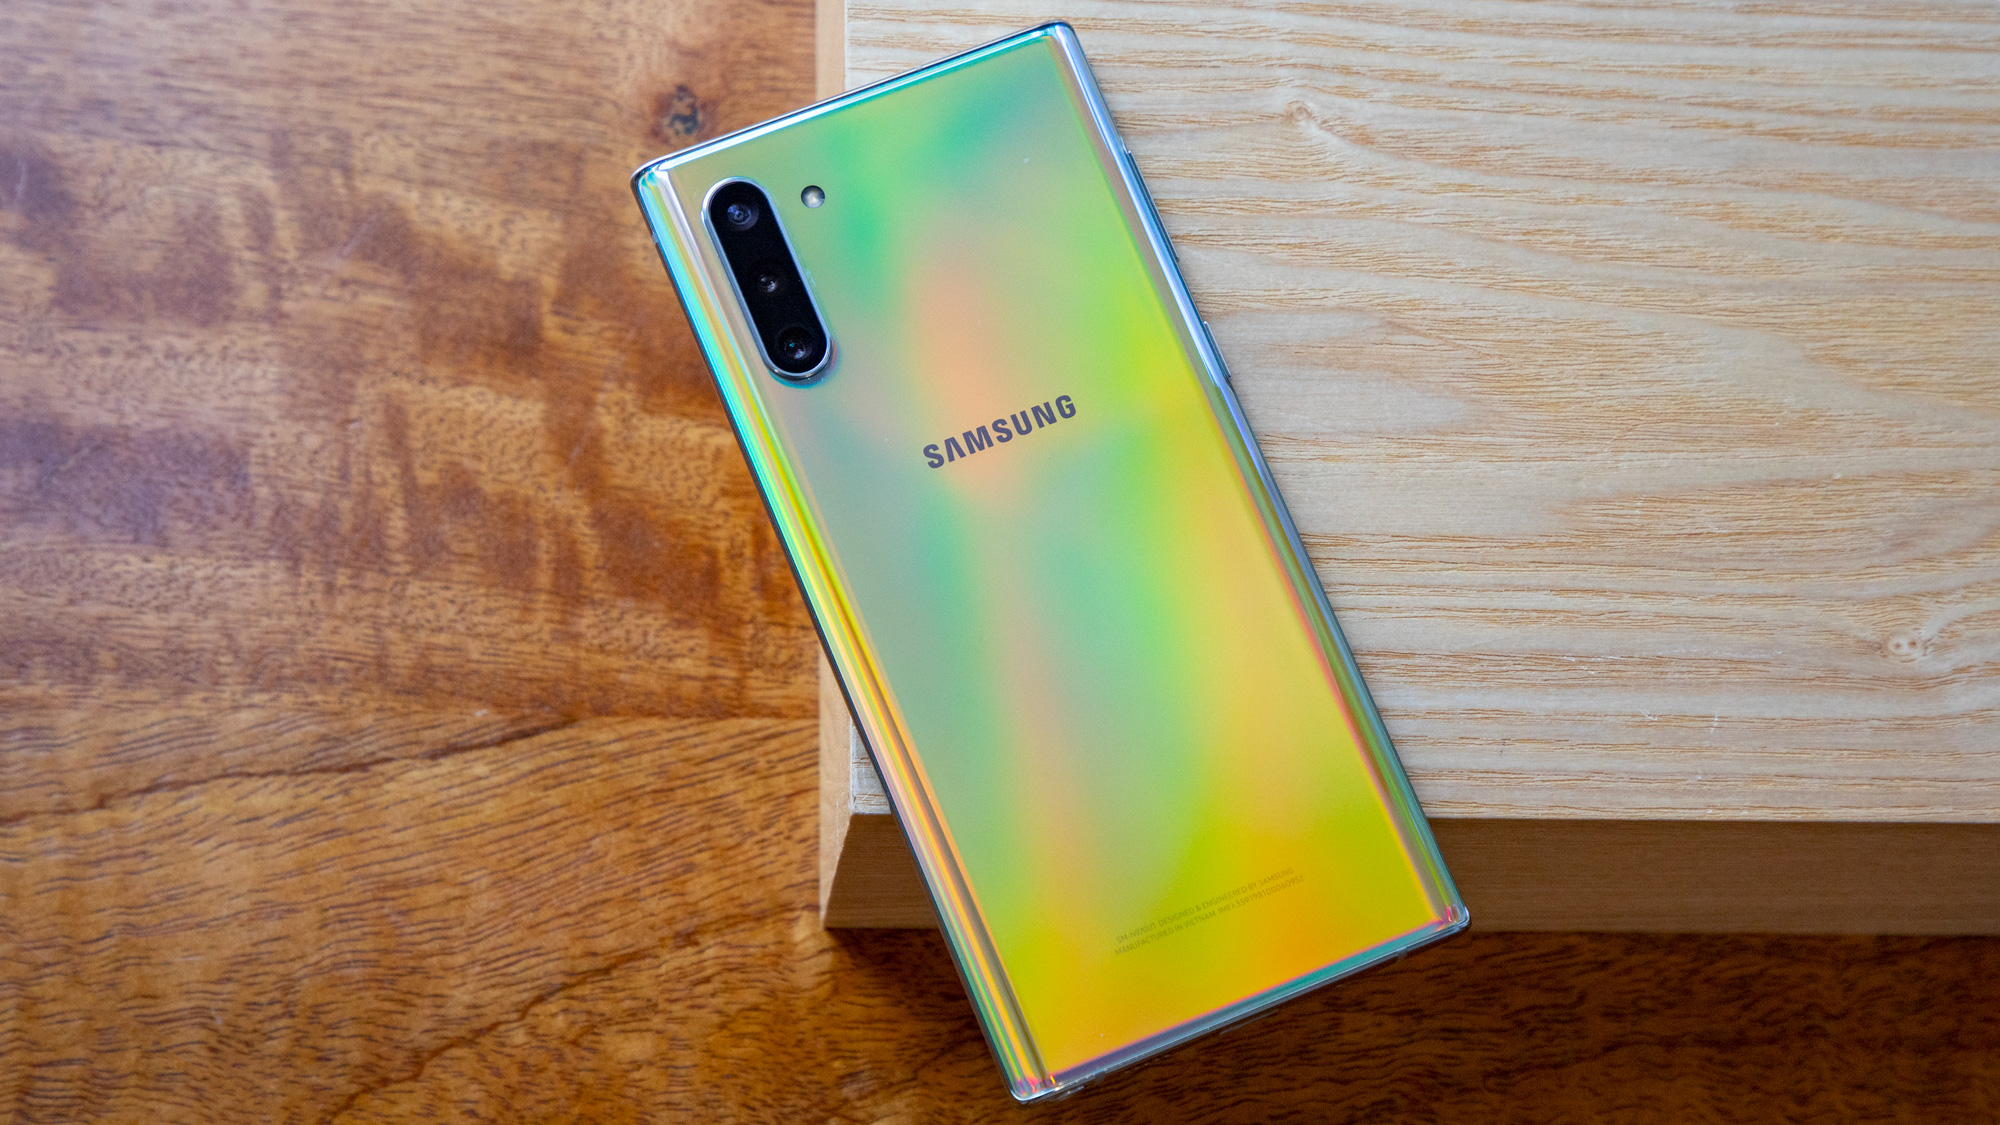 Samsung note s10. Samsung Galaxy Note 10. Самсунг галакси нот 10 Лайт. Самсунг галакси ноут 10s. Samsung Galaxy Note s10 Lite.